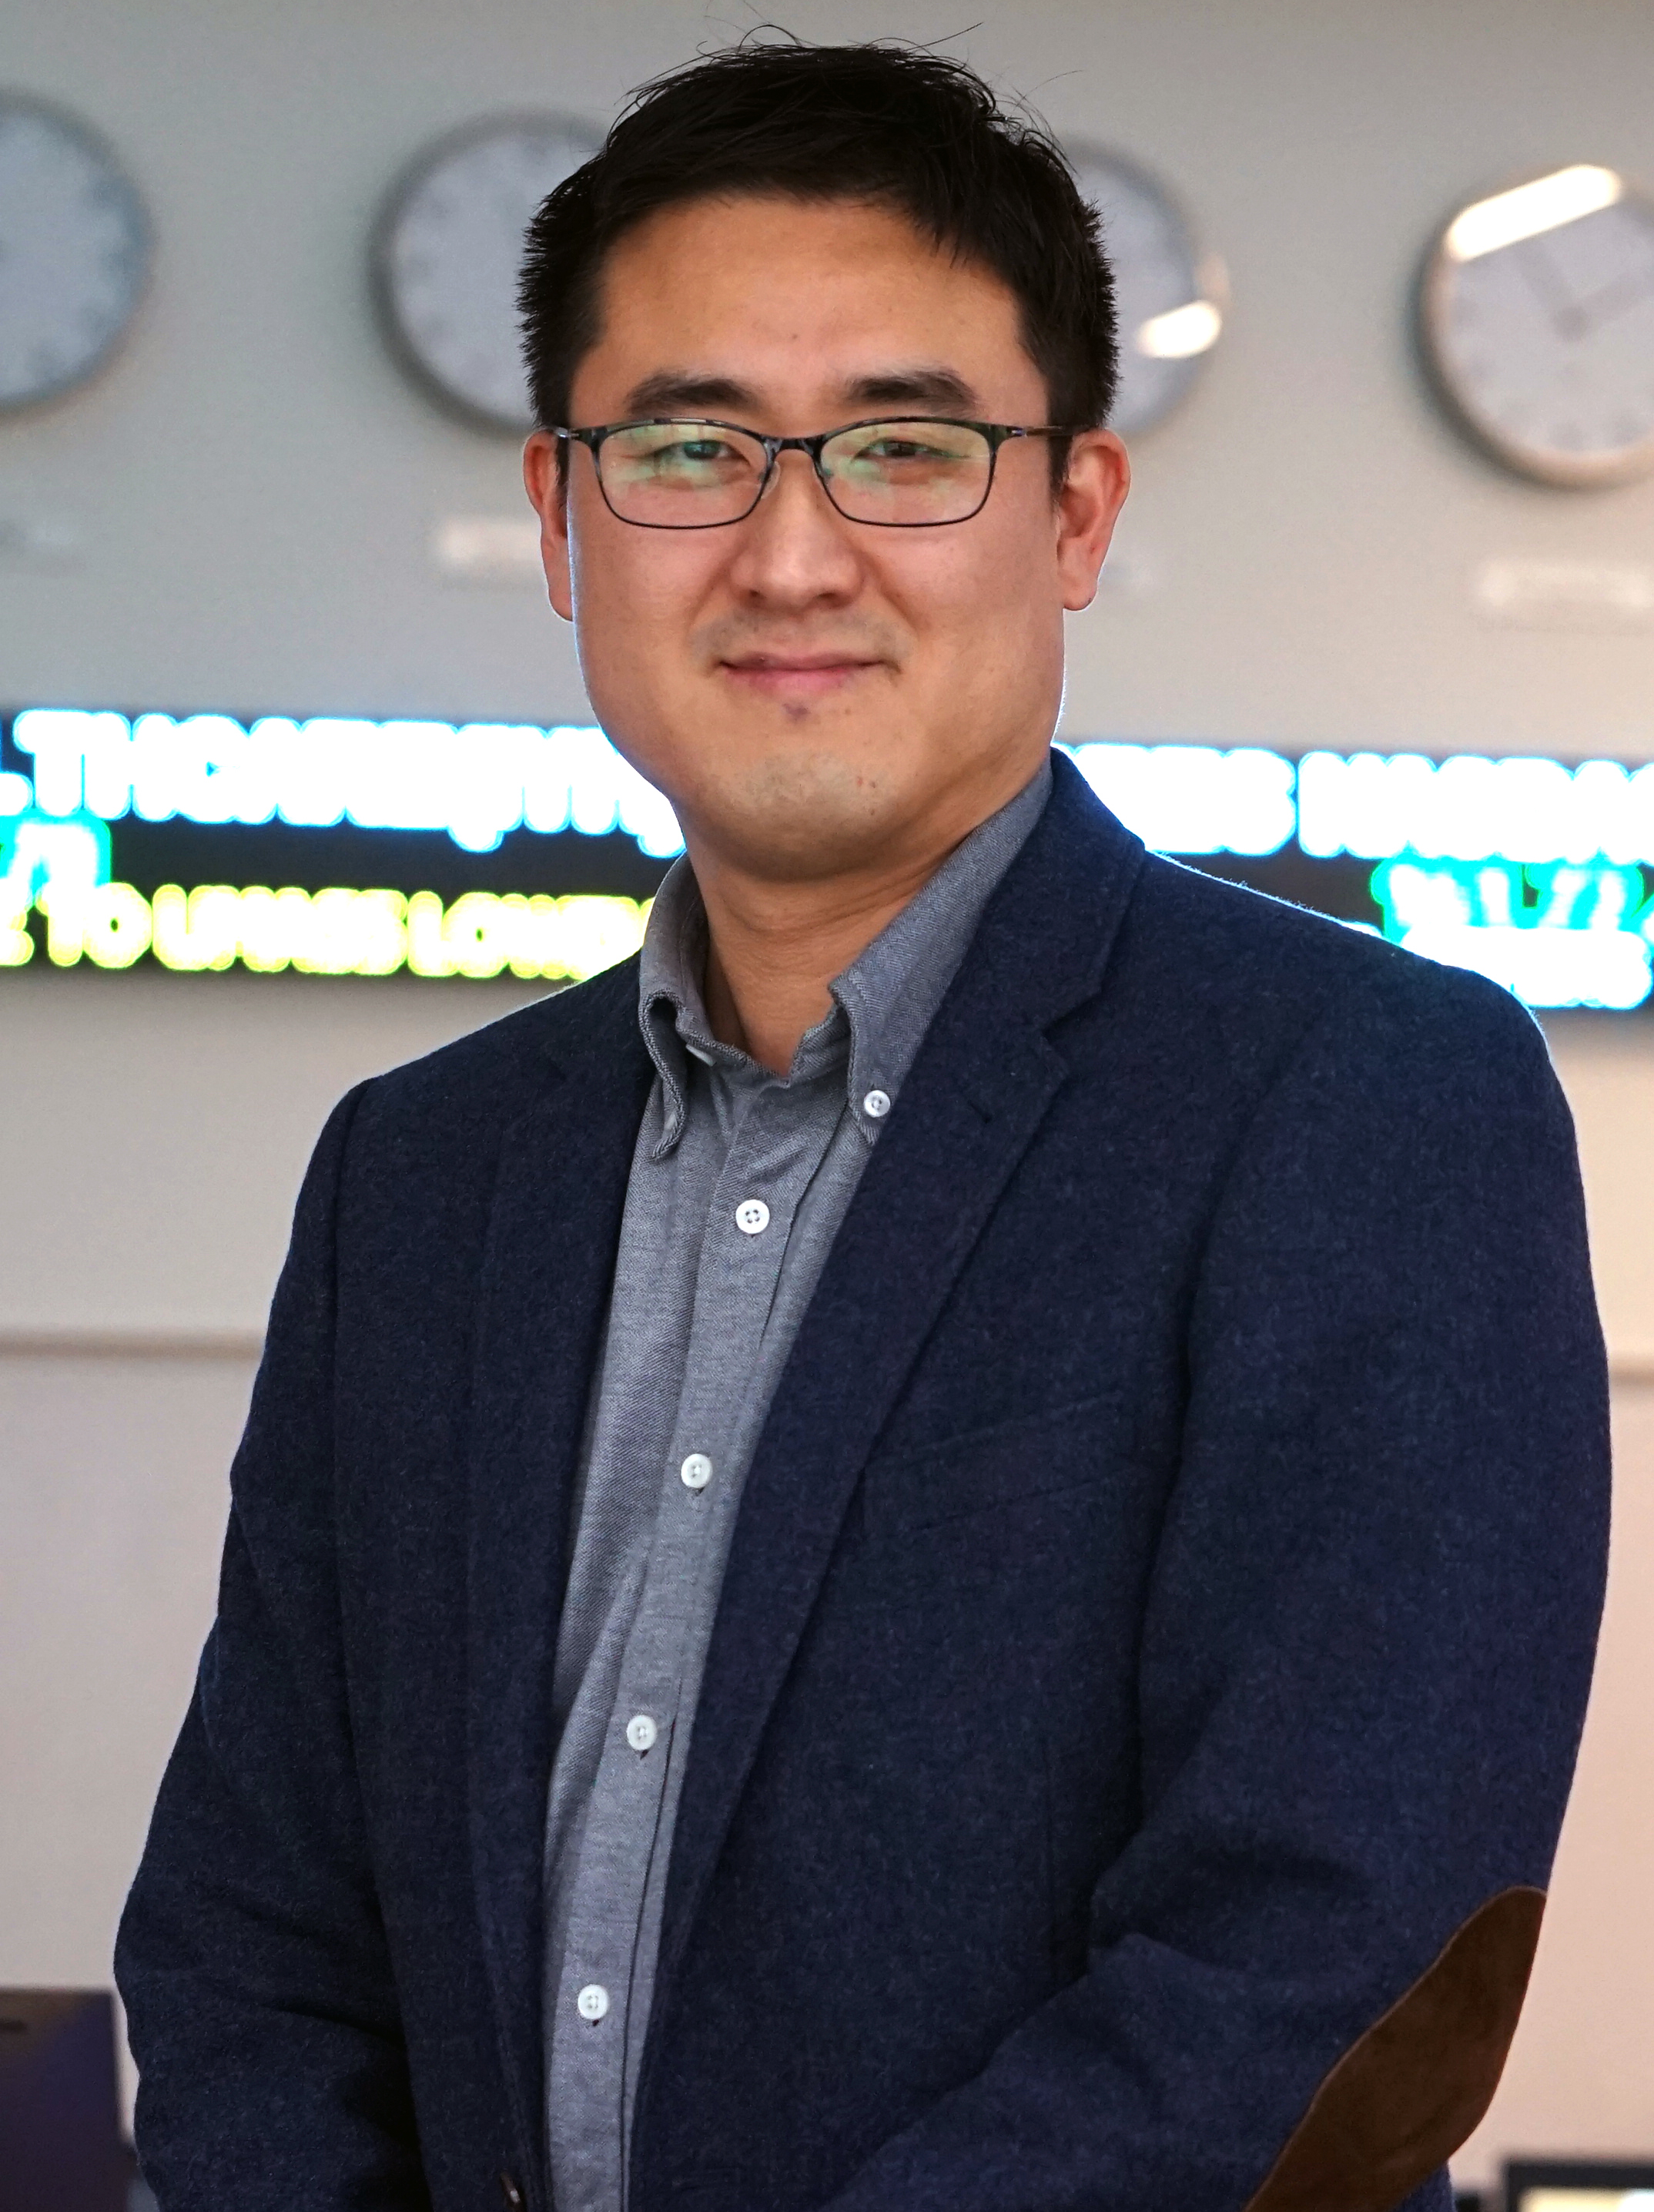 Ju Myung (JM) Song is an Assistant Professor in the Operations and Information Systems Department at UMass Lowell.